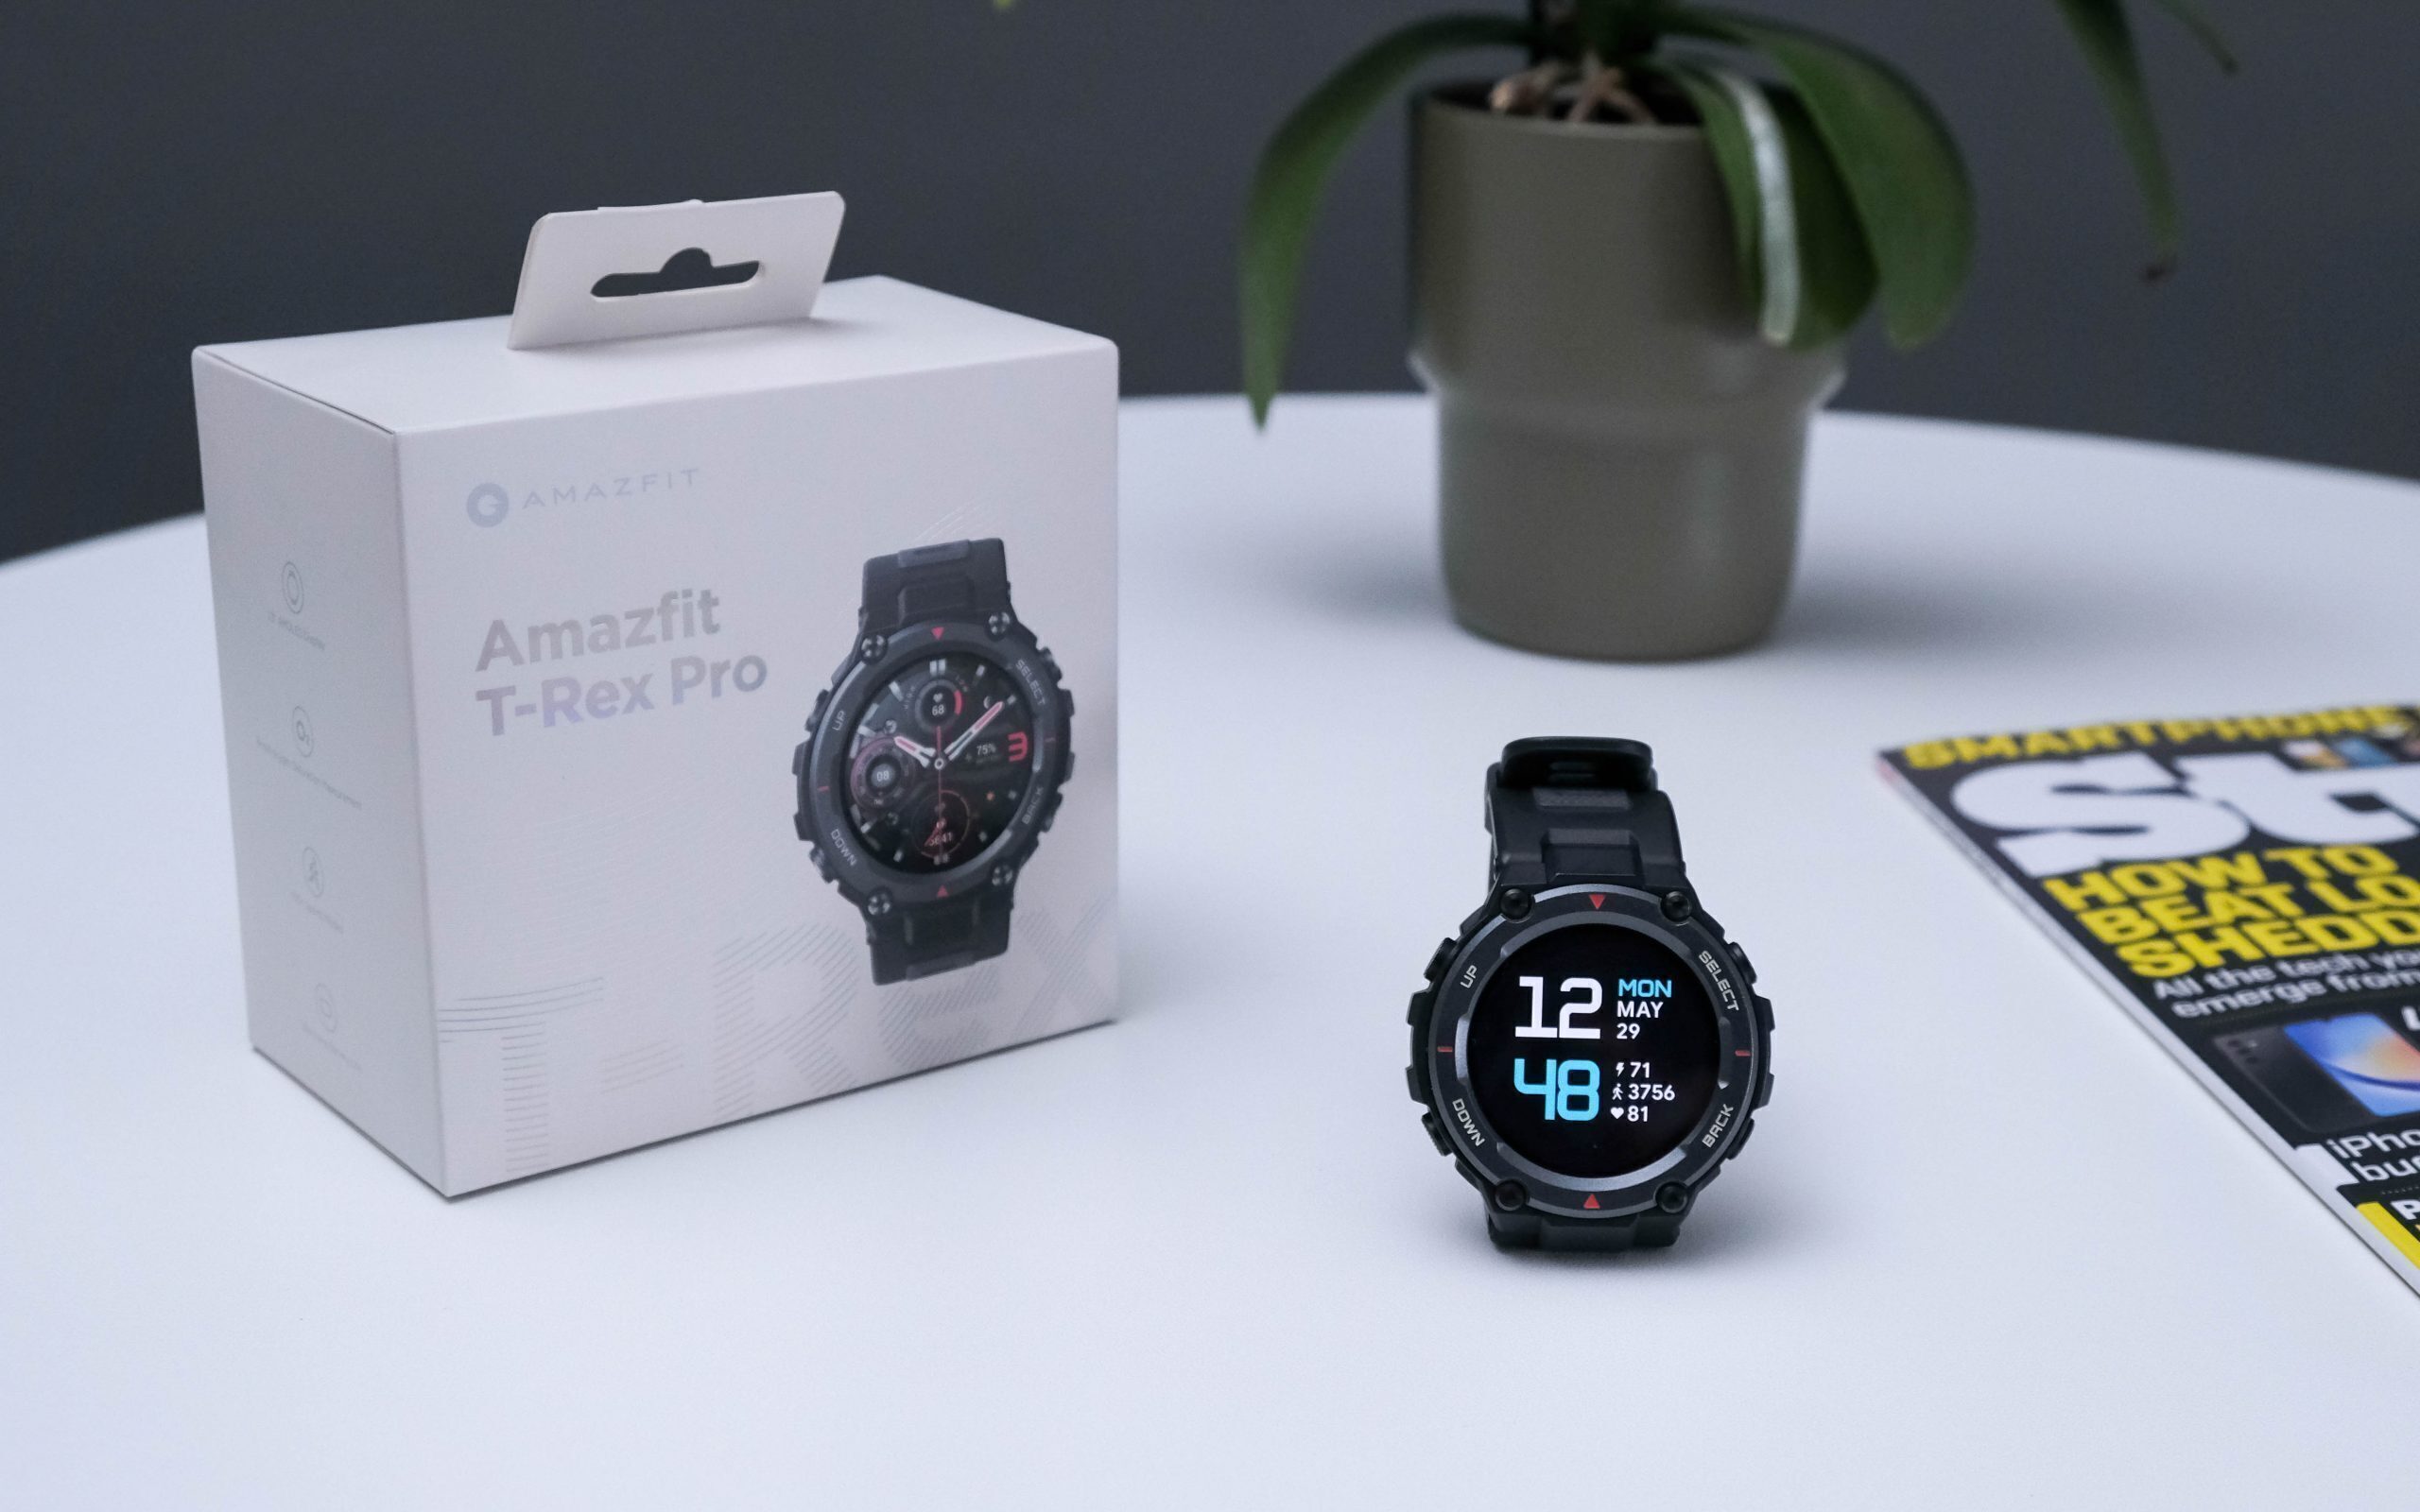 Amazfit T-Rex Pro Review - Reliable Watch At A Respectable Price